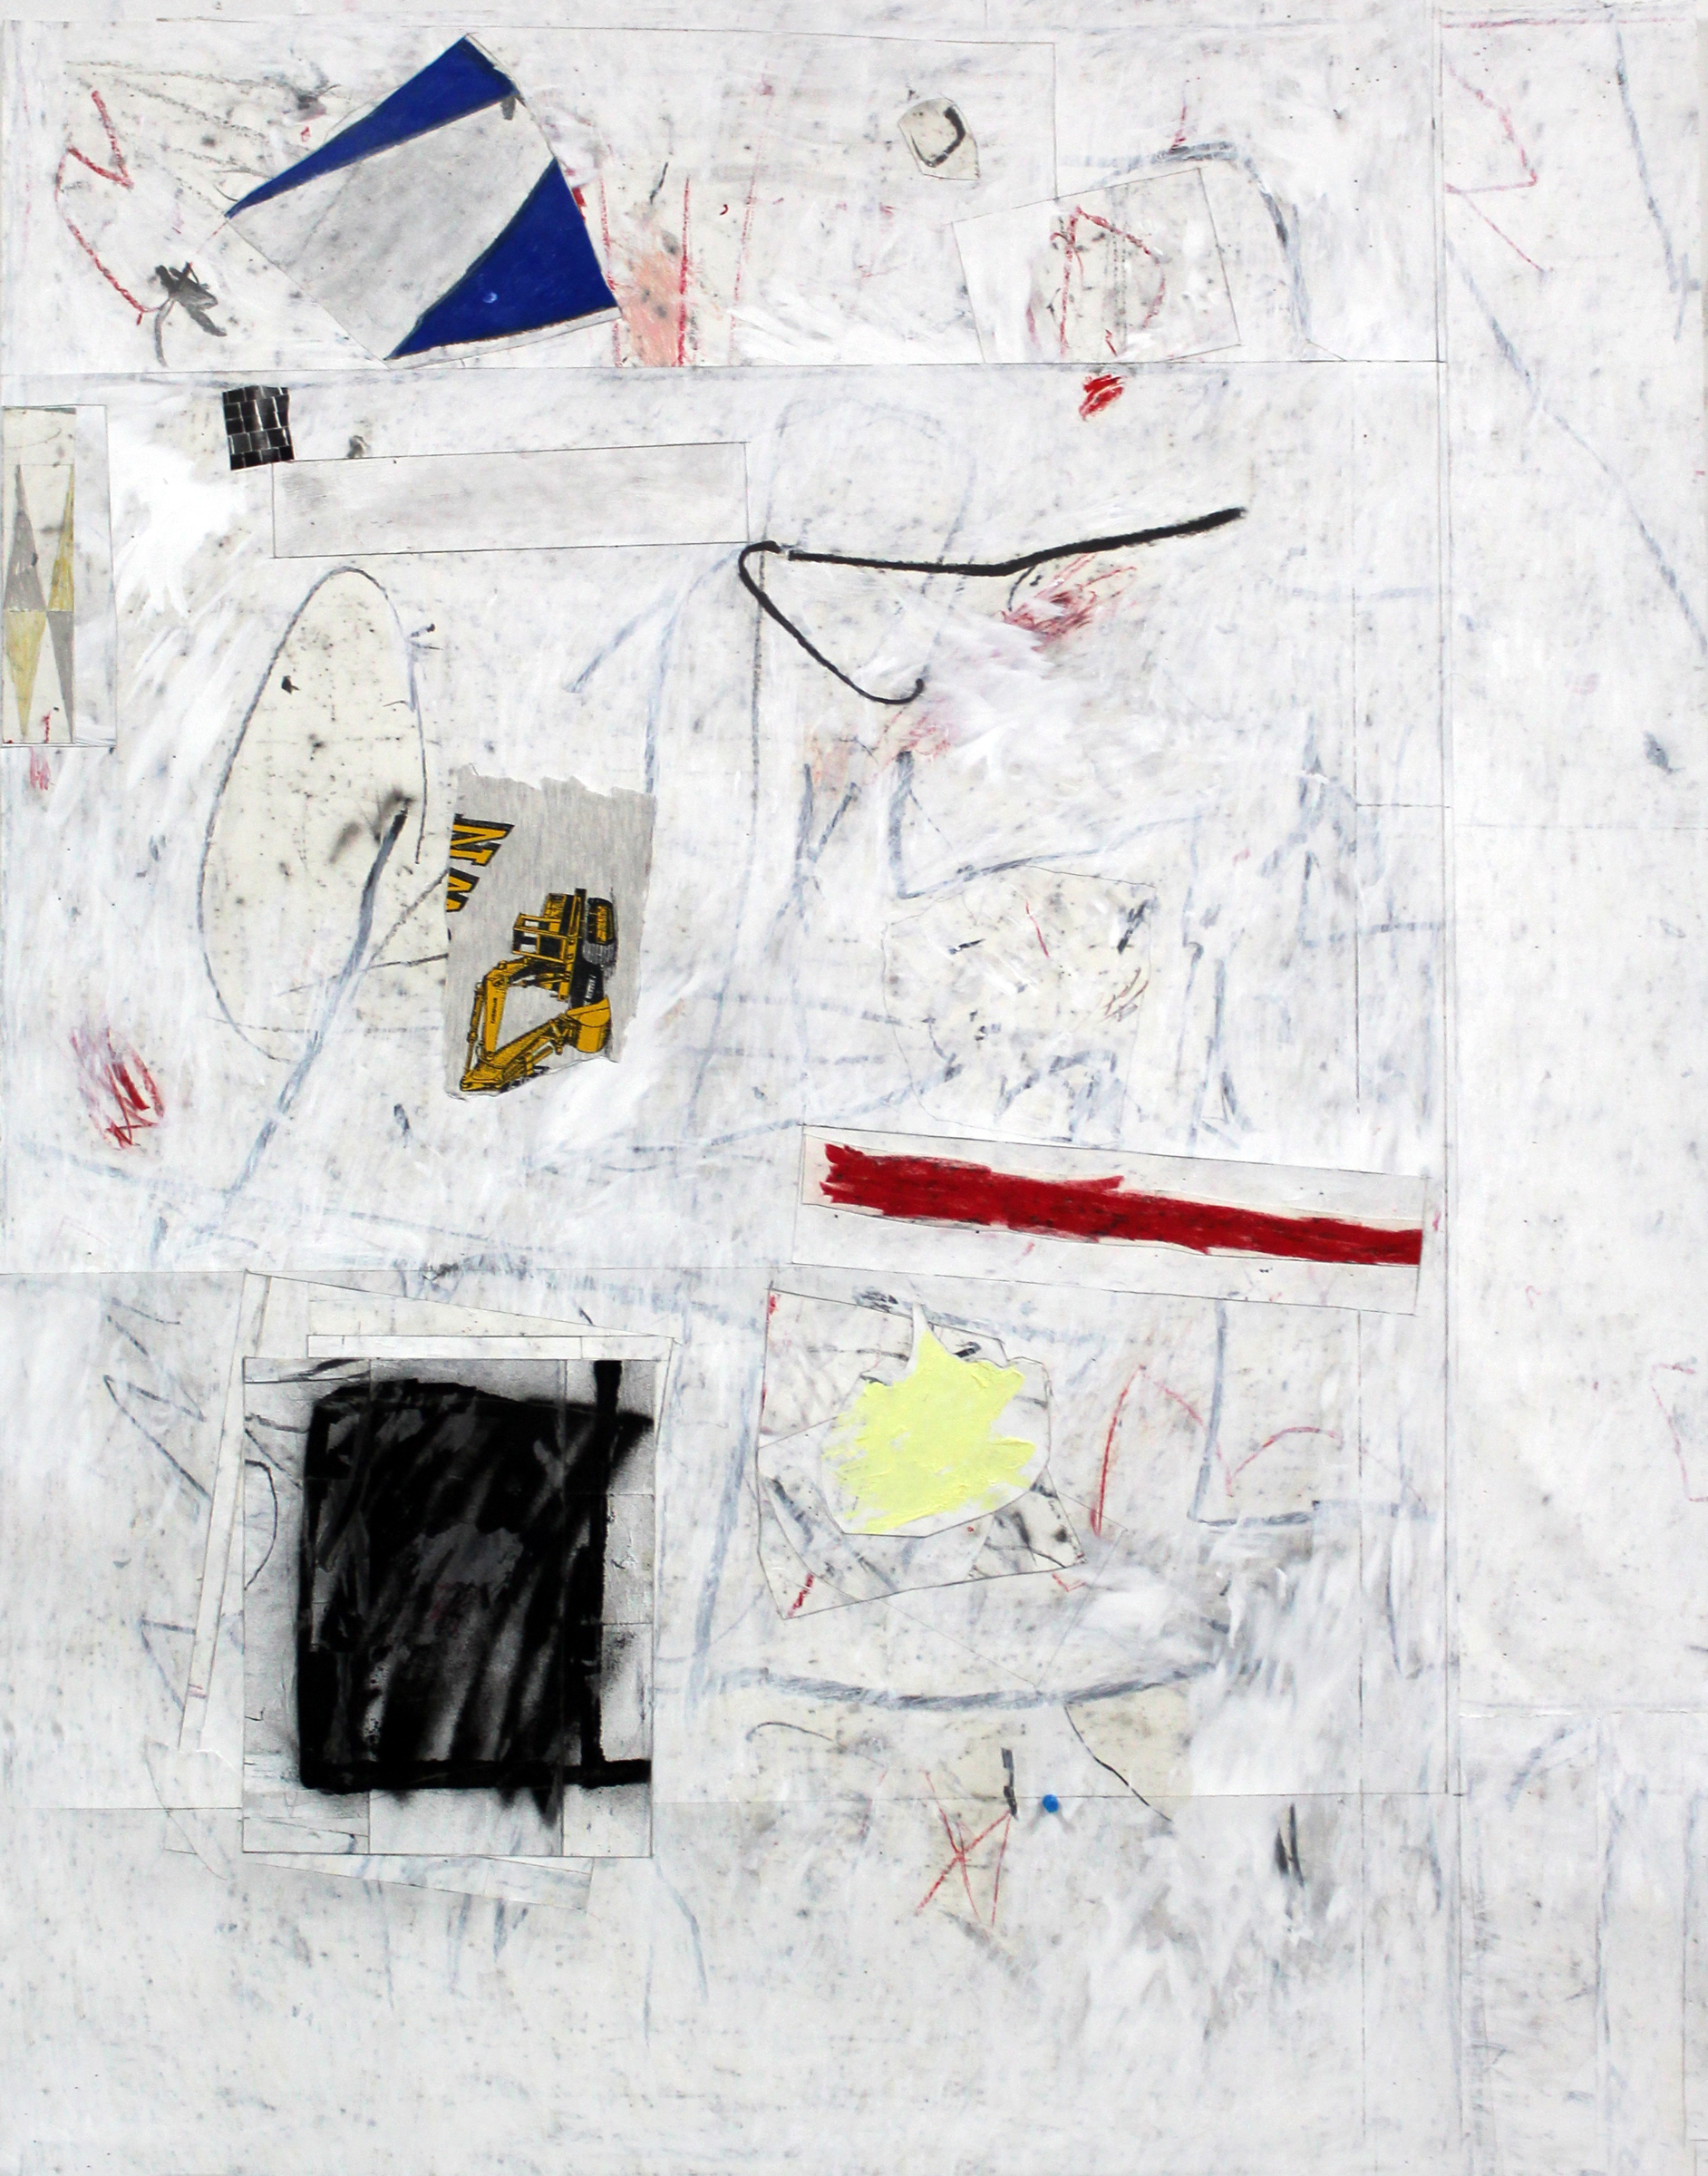   JOSEPH HART   Excavator , collaged paper, acrylic, oil crayon and graphite on paper, 52" x 42", 2013 